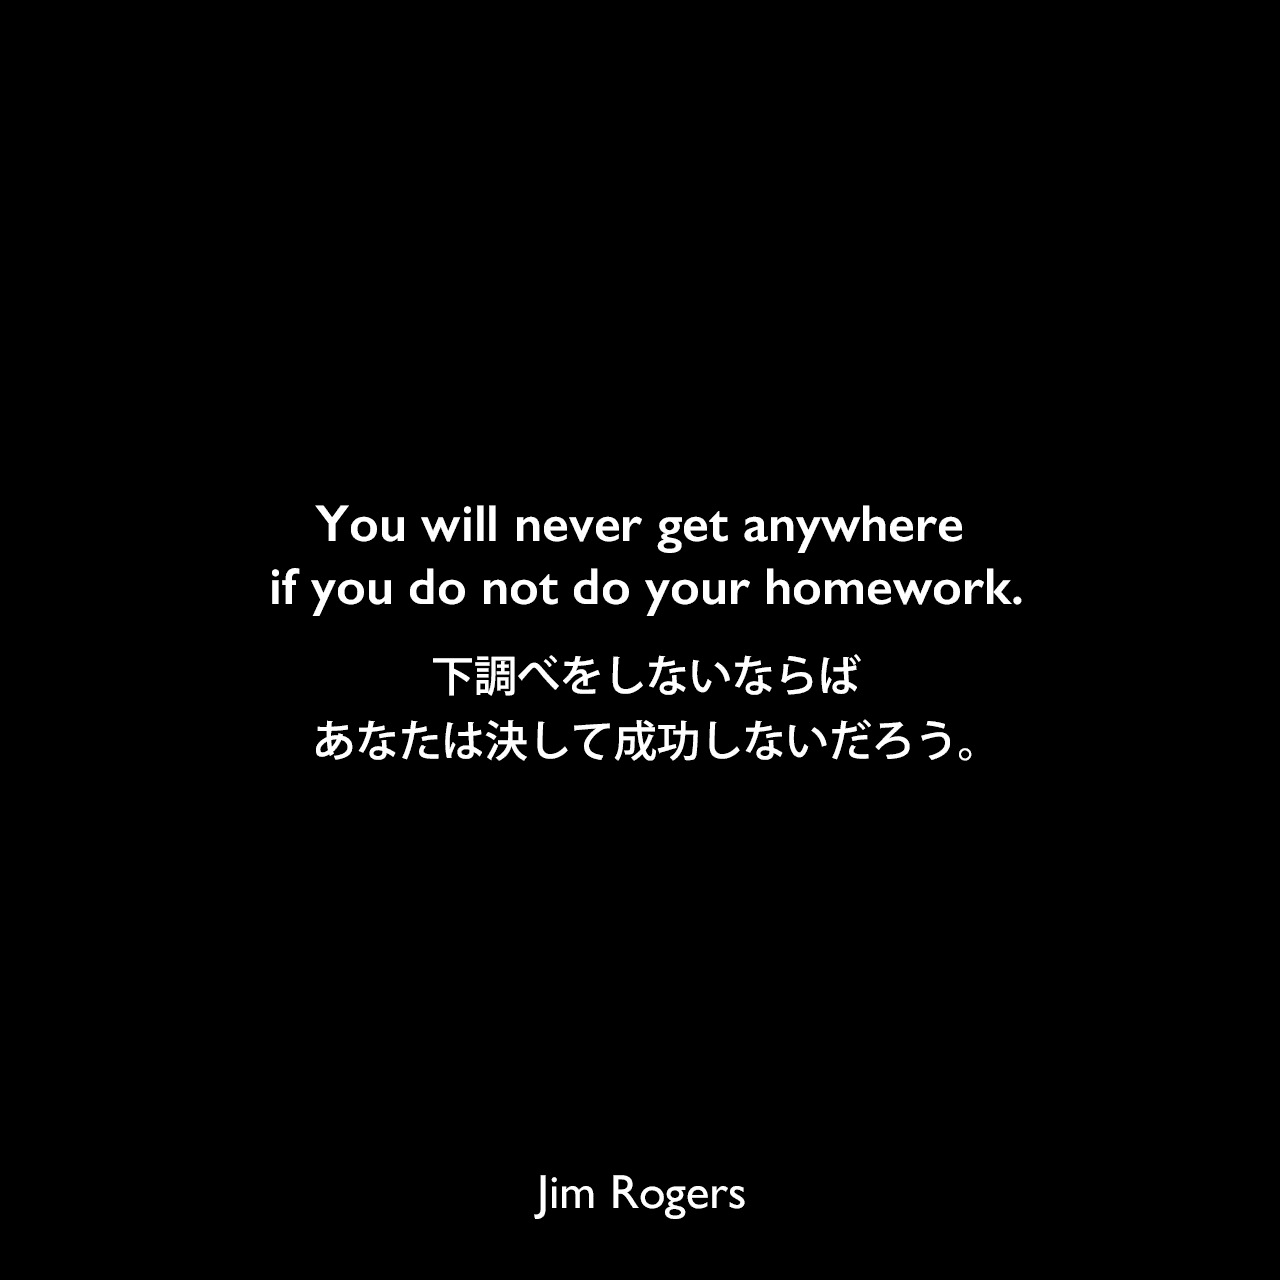 You will never get anywhere if you do not do your homework.下調べをしないならば、あなたは決して成功しないだろう。Jim Rogers